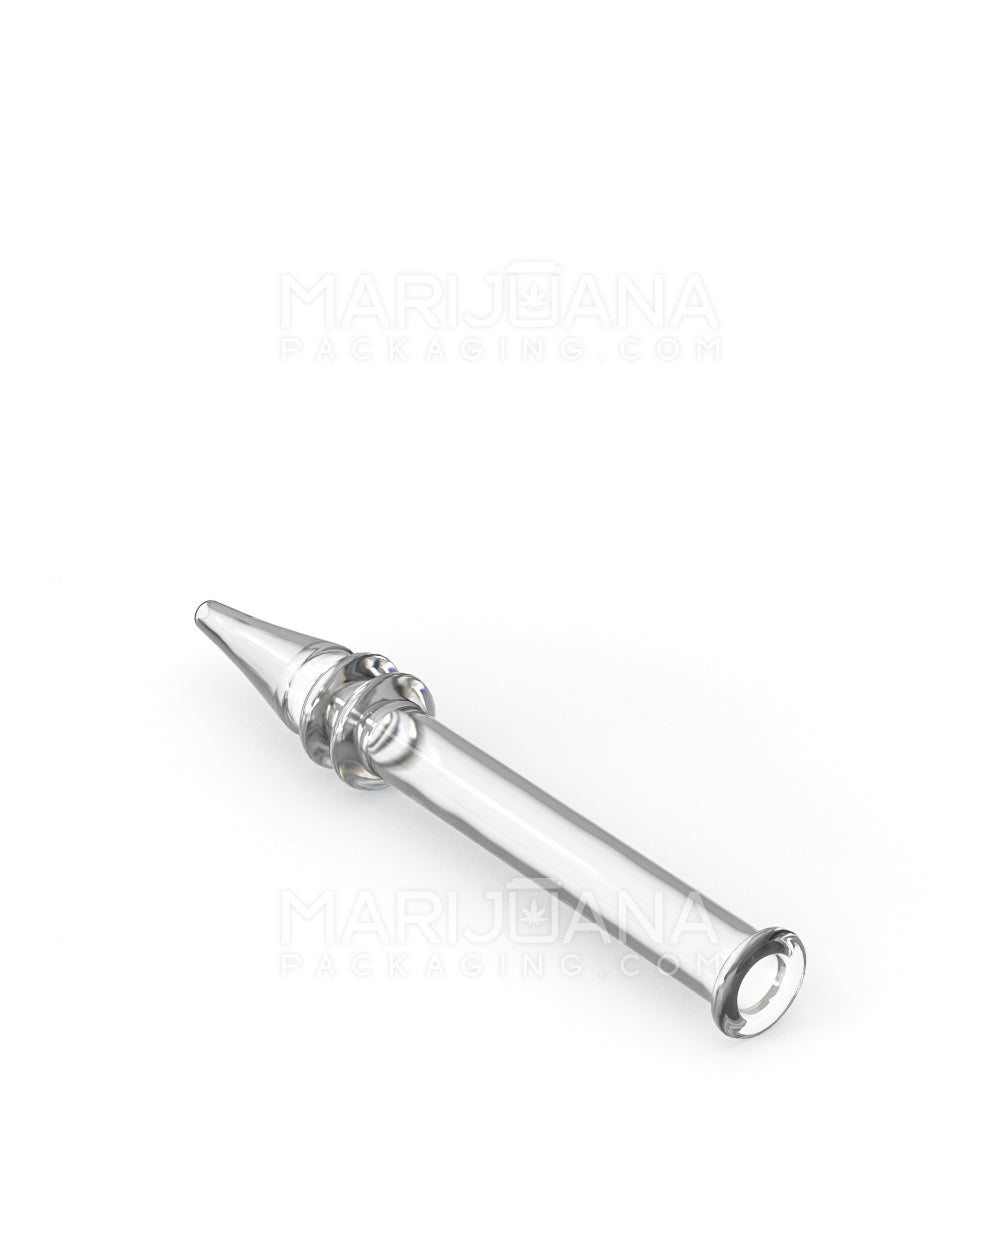 Full Quartz Nectar Collector Dab Pipe | 5in Long - 10mm Attachment - Clear - 4